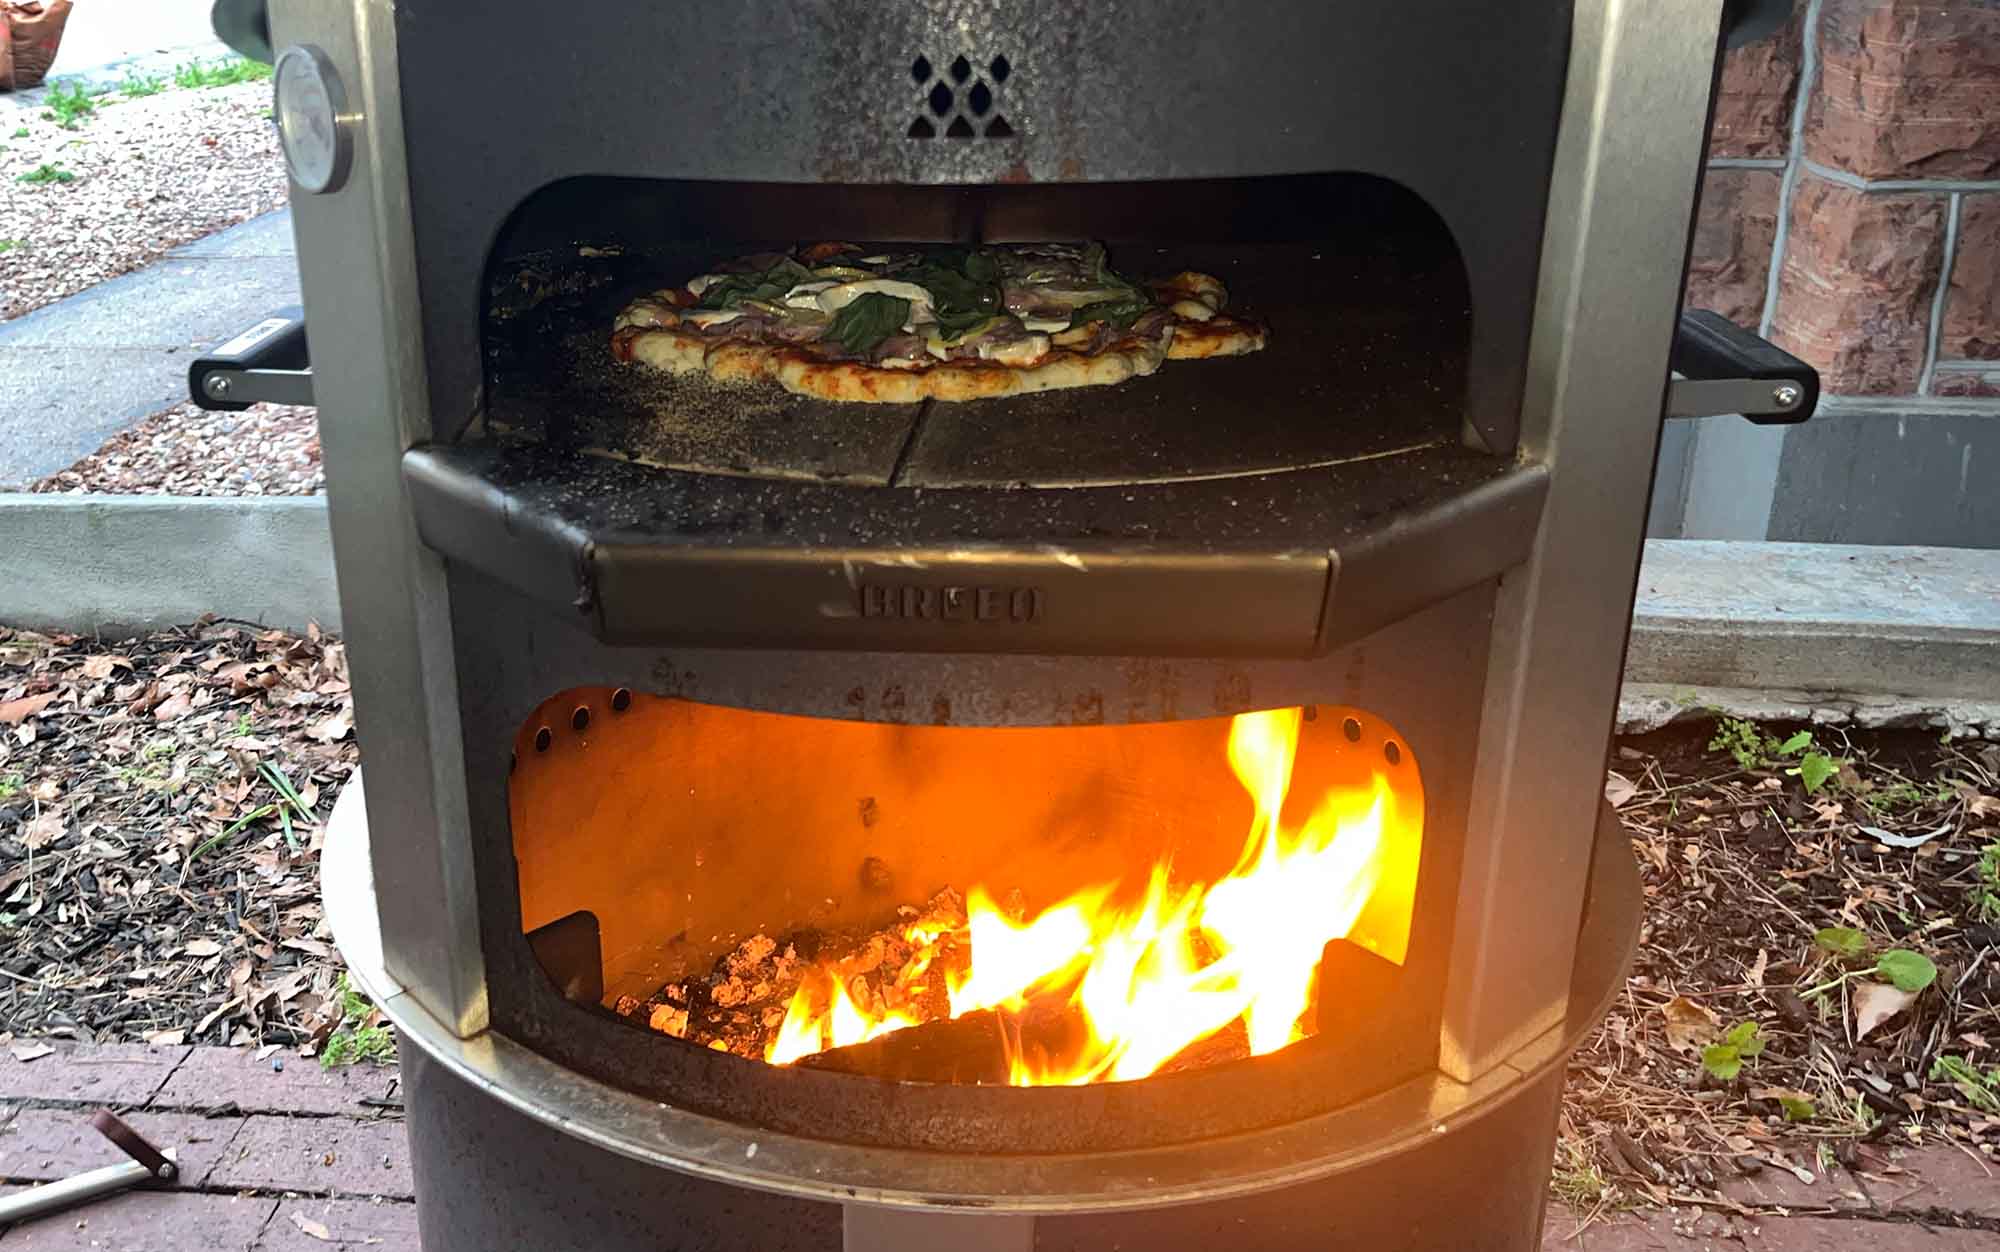 A pizza cooks in the Breeo Live-Fire pizza oven.